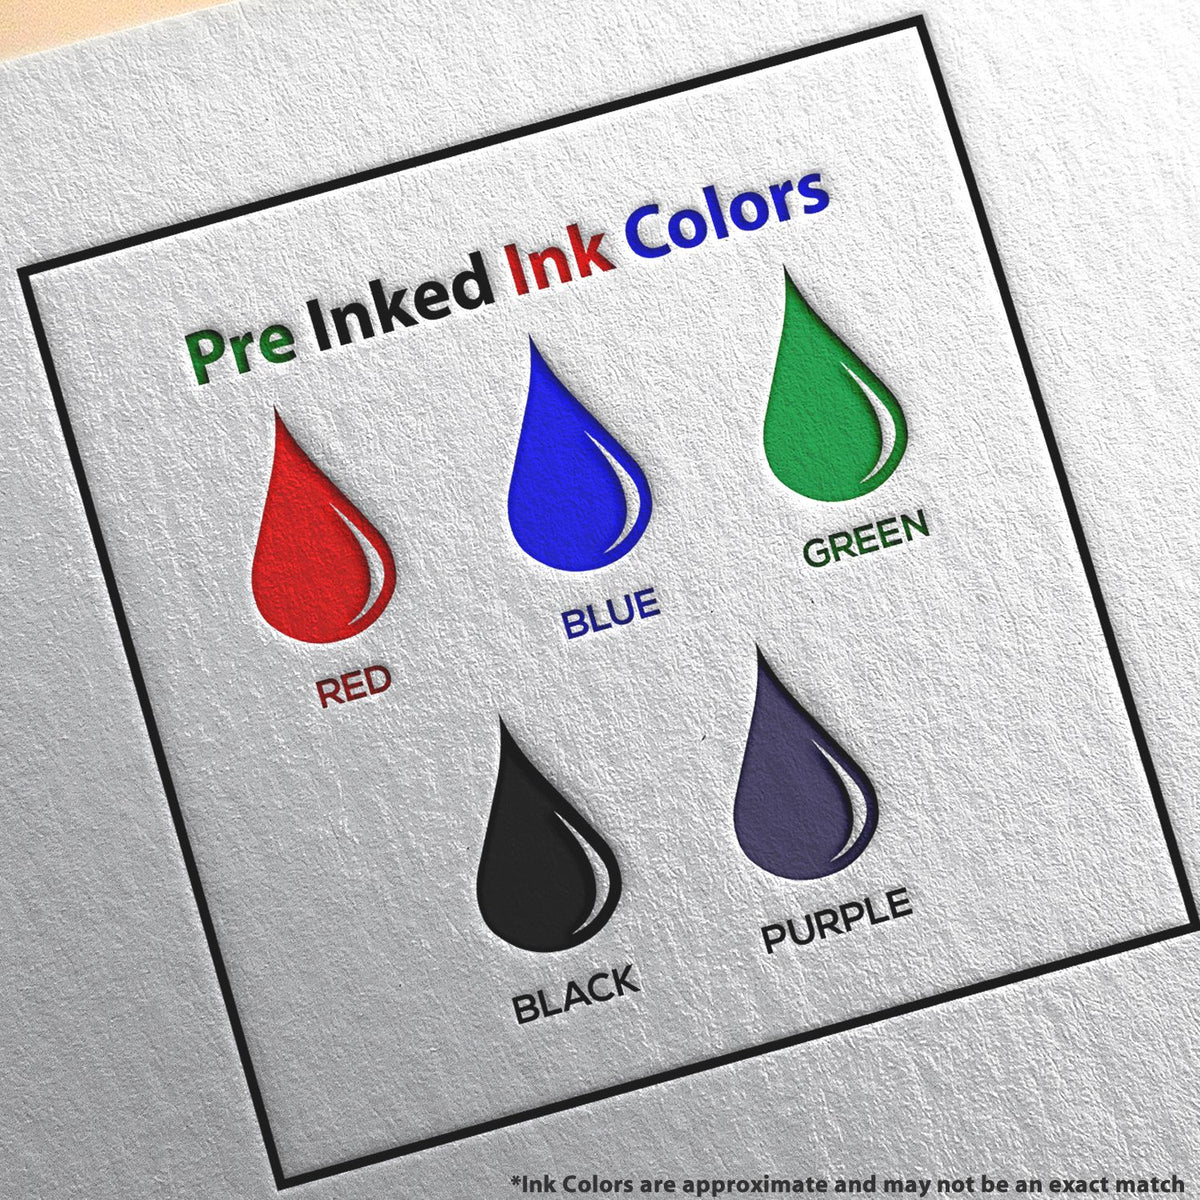 A picture showing the different ink colors or hues available for the Slim Pre-Inked Colorado Land Surveyor Seal Stamp product.